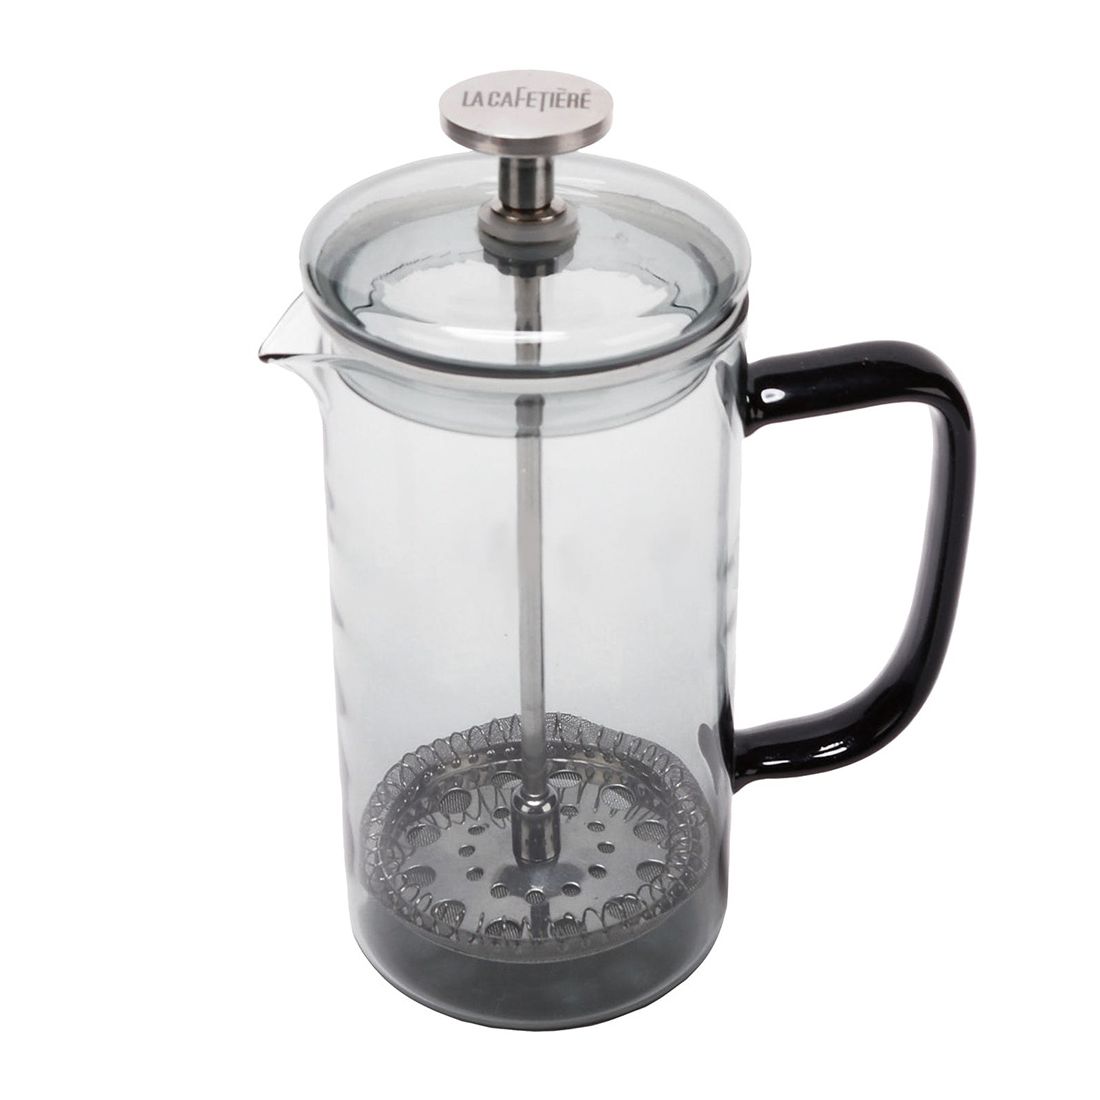 Kitchencraft L.A. Cafetiere Smoke Grey-Coloured 3-Cup Glass Cafetiere 350ml